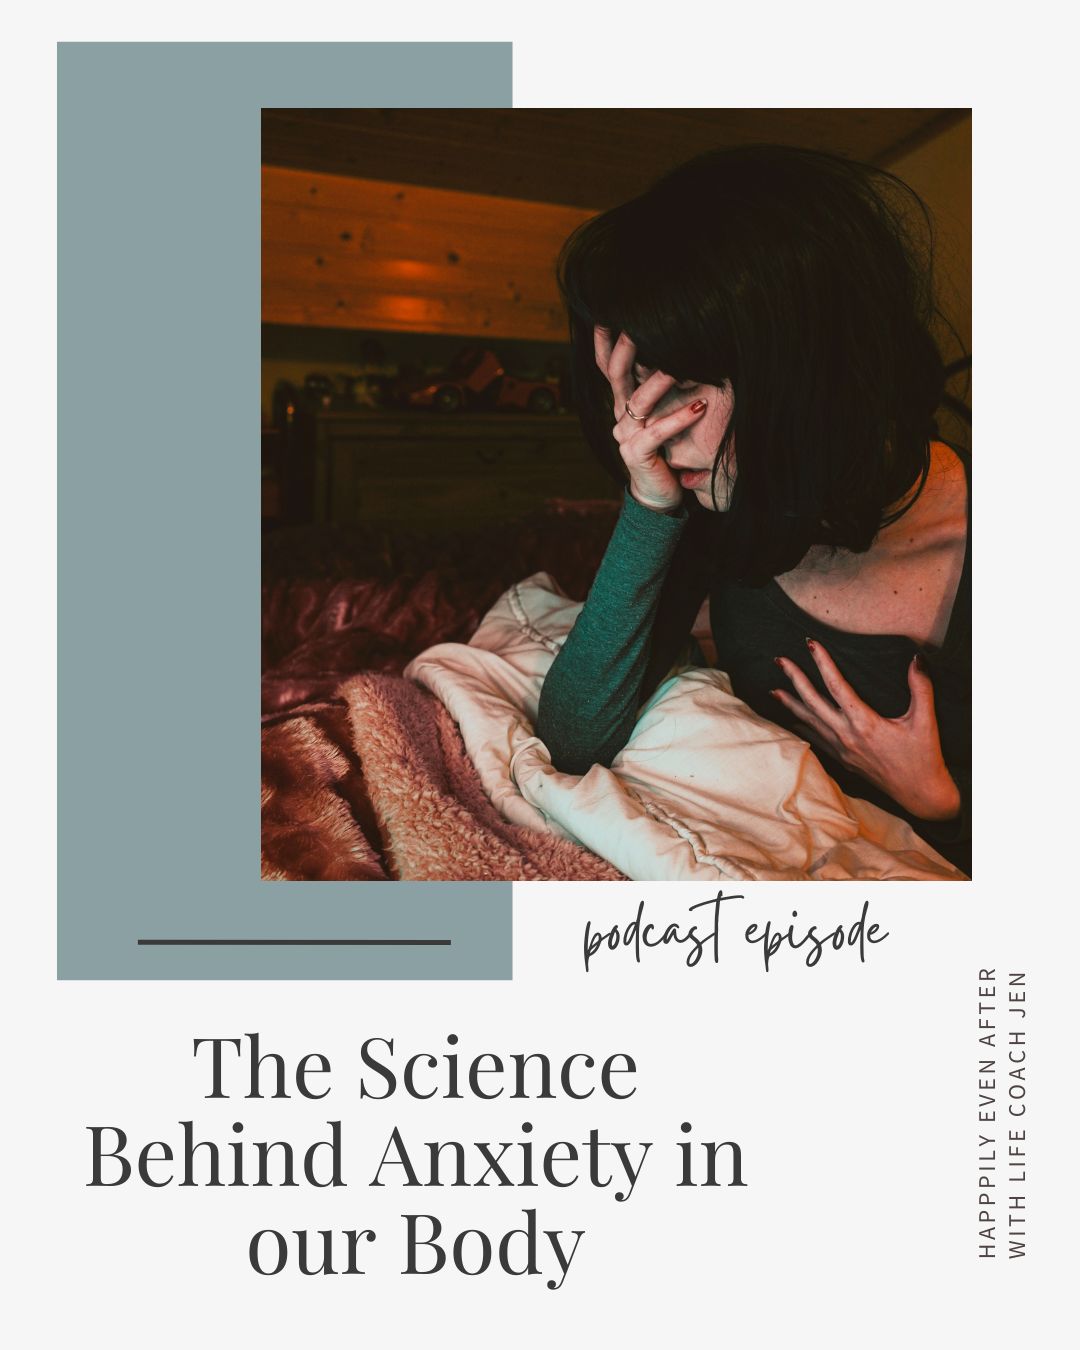 A woman sitting on a bed, covering her face with a hand, with dim lighting and a podcast episode graphic titled "the science behind anxiety in the body.